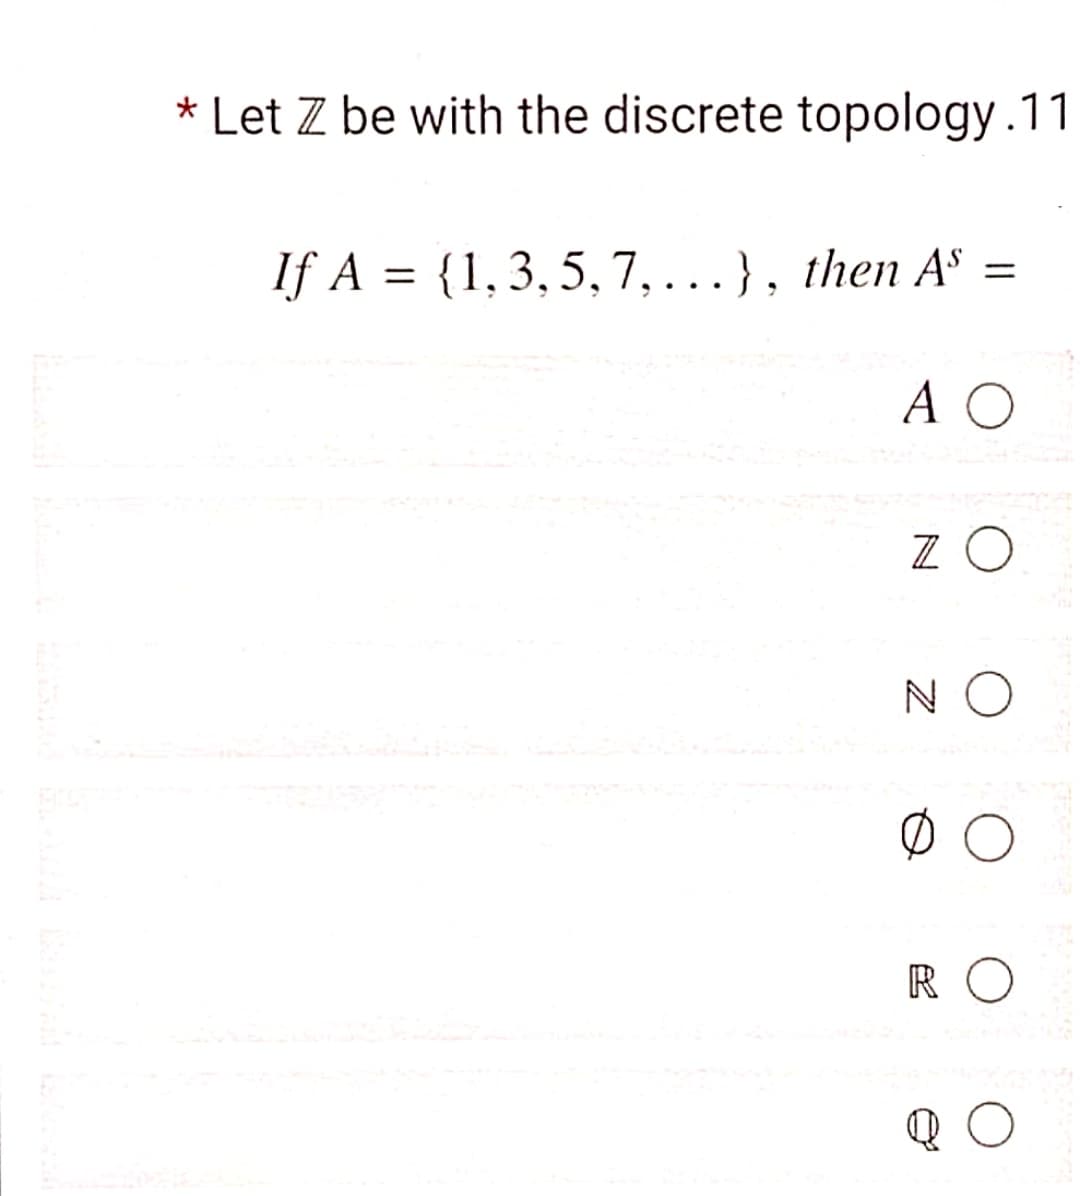 * Let Z be with the discrete topology.11
If A = {1,3,5, 7,...}, then Aº
%3D
%3D
A O
N O
R O
